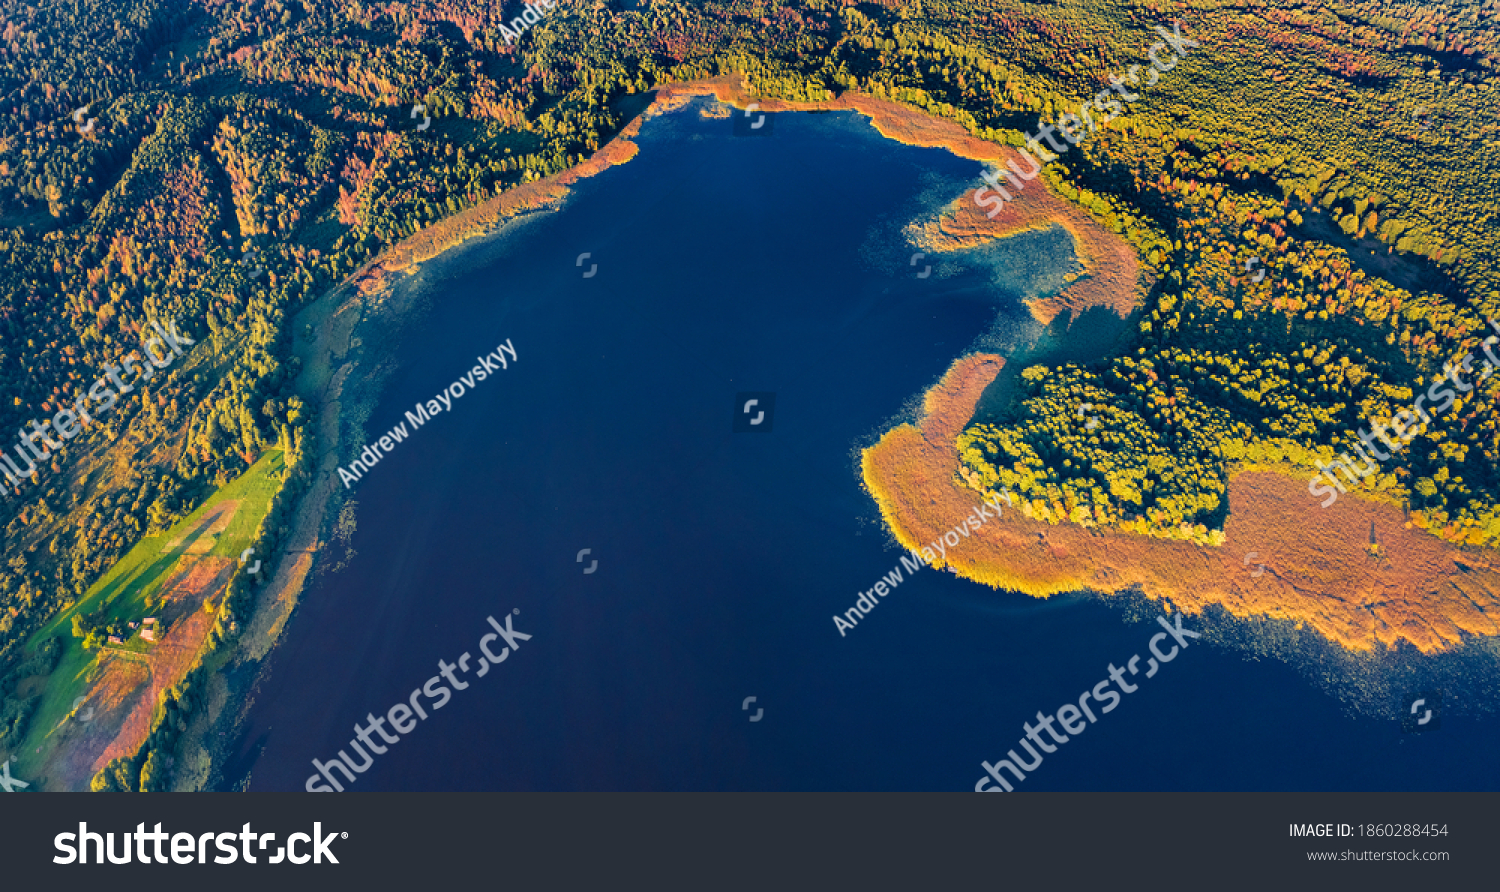 Straight down view of Krymne Lake. First sunlight glooving the shoure of fishing lake. Bright morning scene of Shatsky National Park, Volyn region, Ukraine, Europe. Aerial landscape photography.
 #1860288454